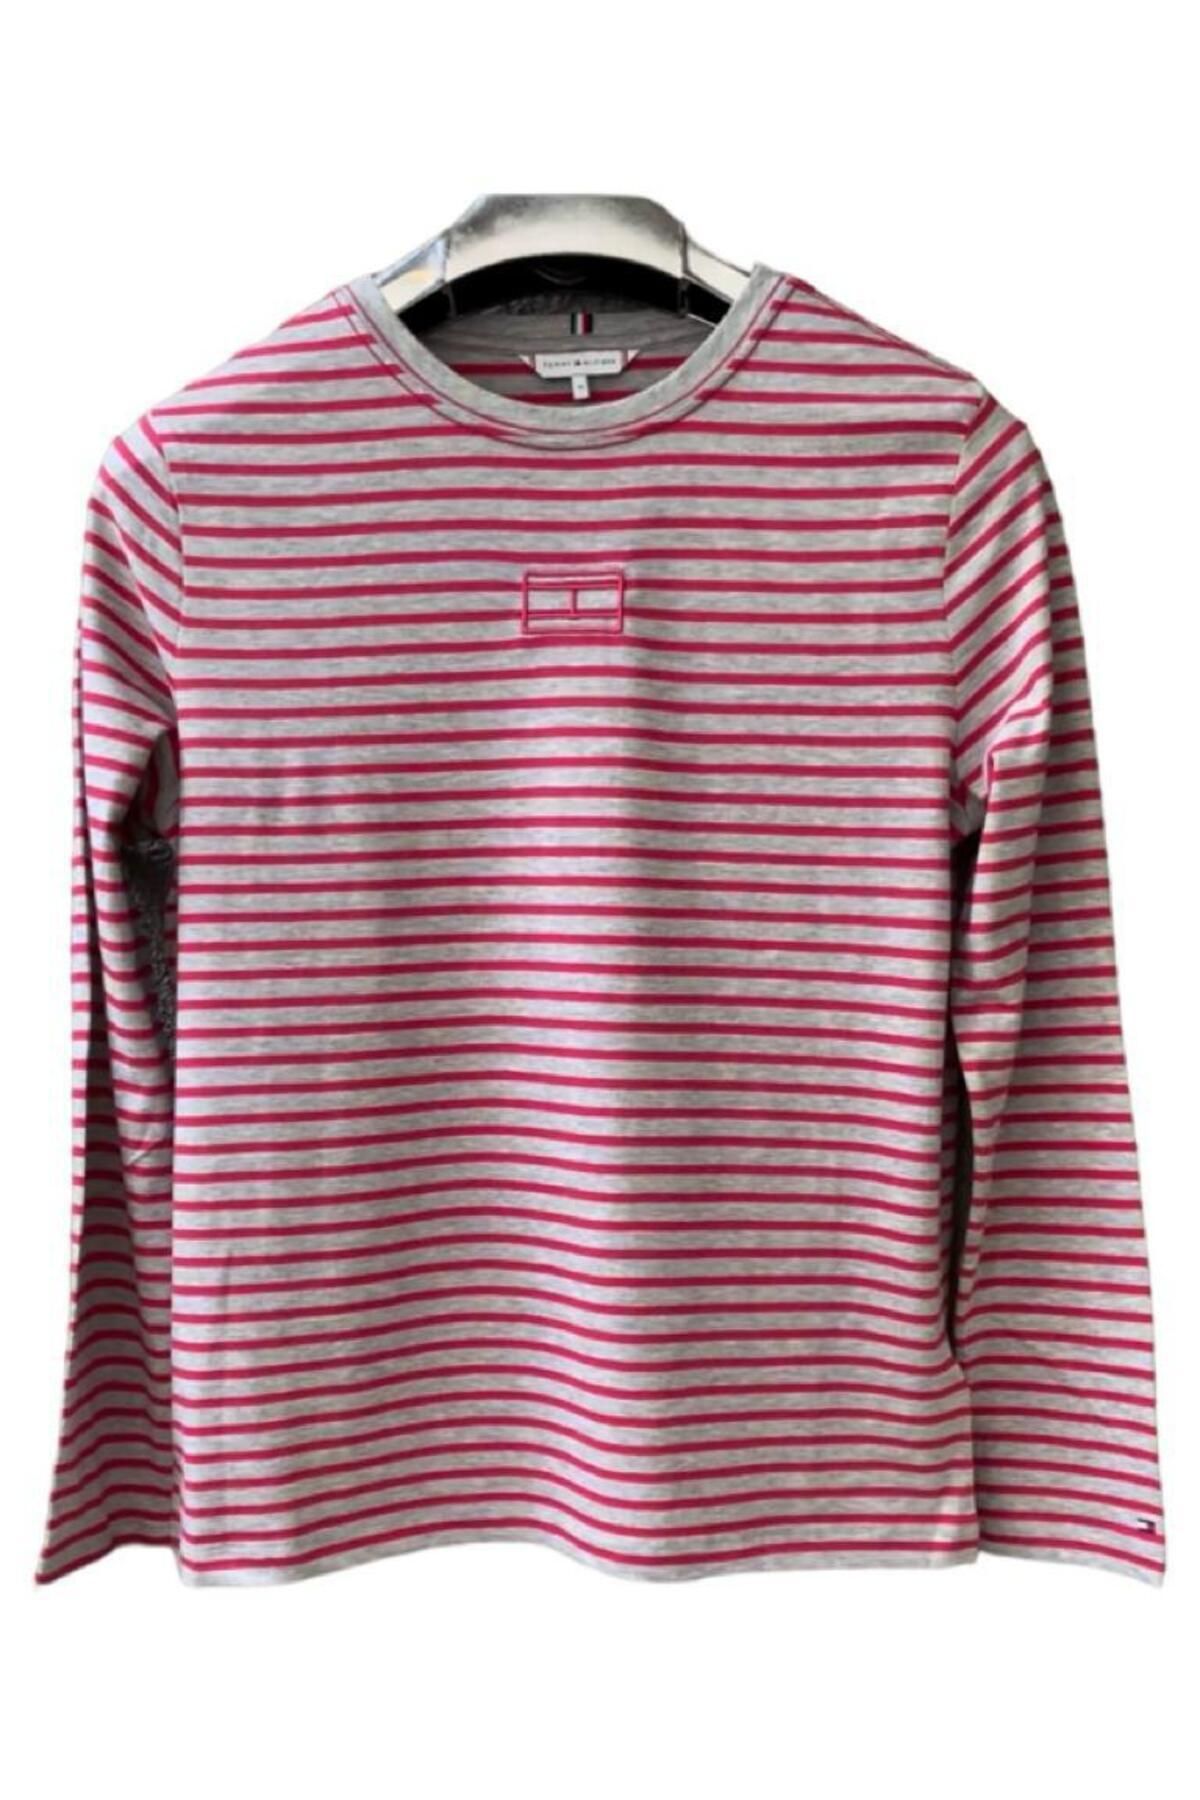 Tommy Hilfiger STRIPED LONG SLEEVE TOP